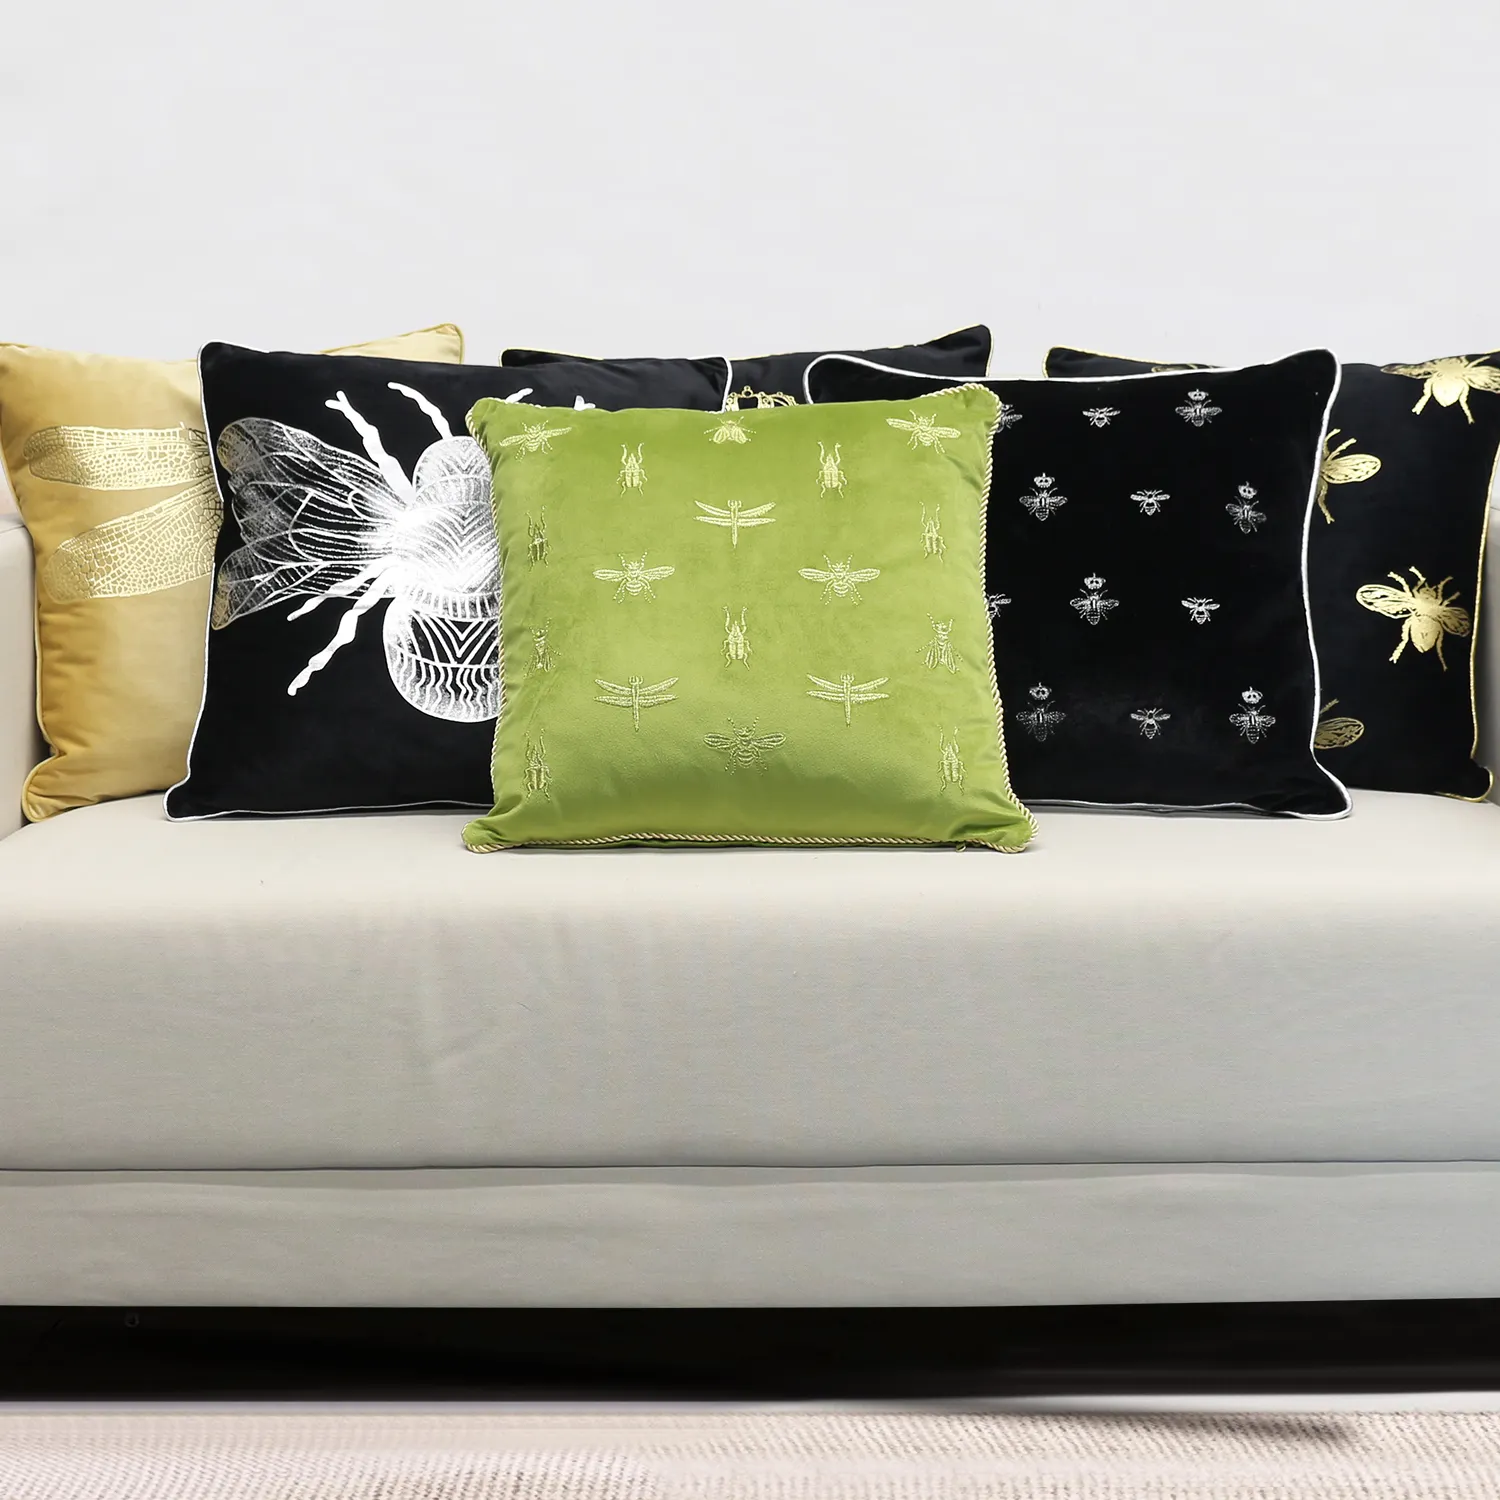 High quality gold foil printing decor cushion, bee garden design pillow case for couch